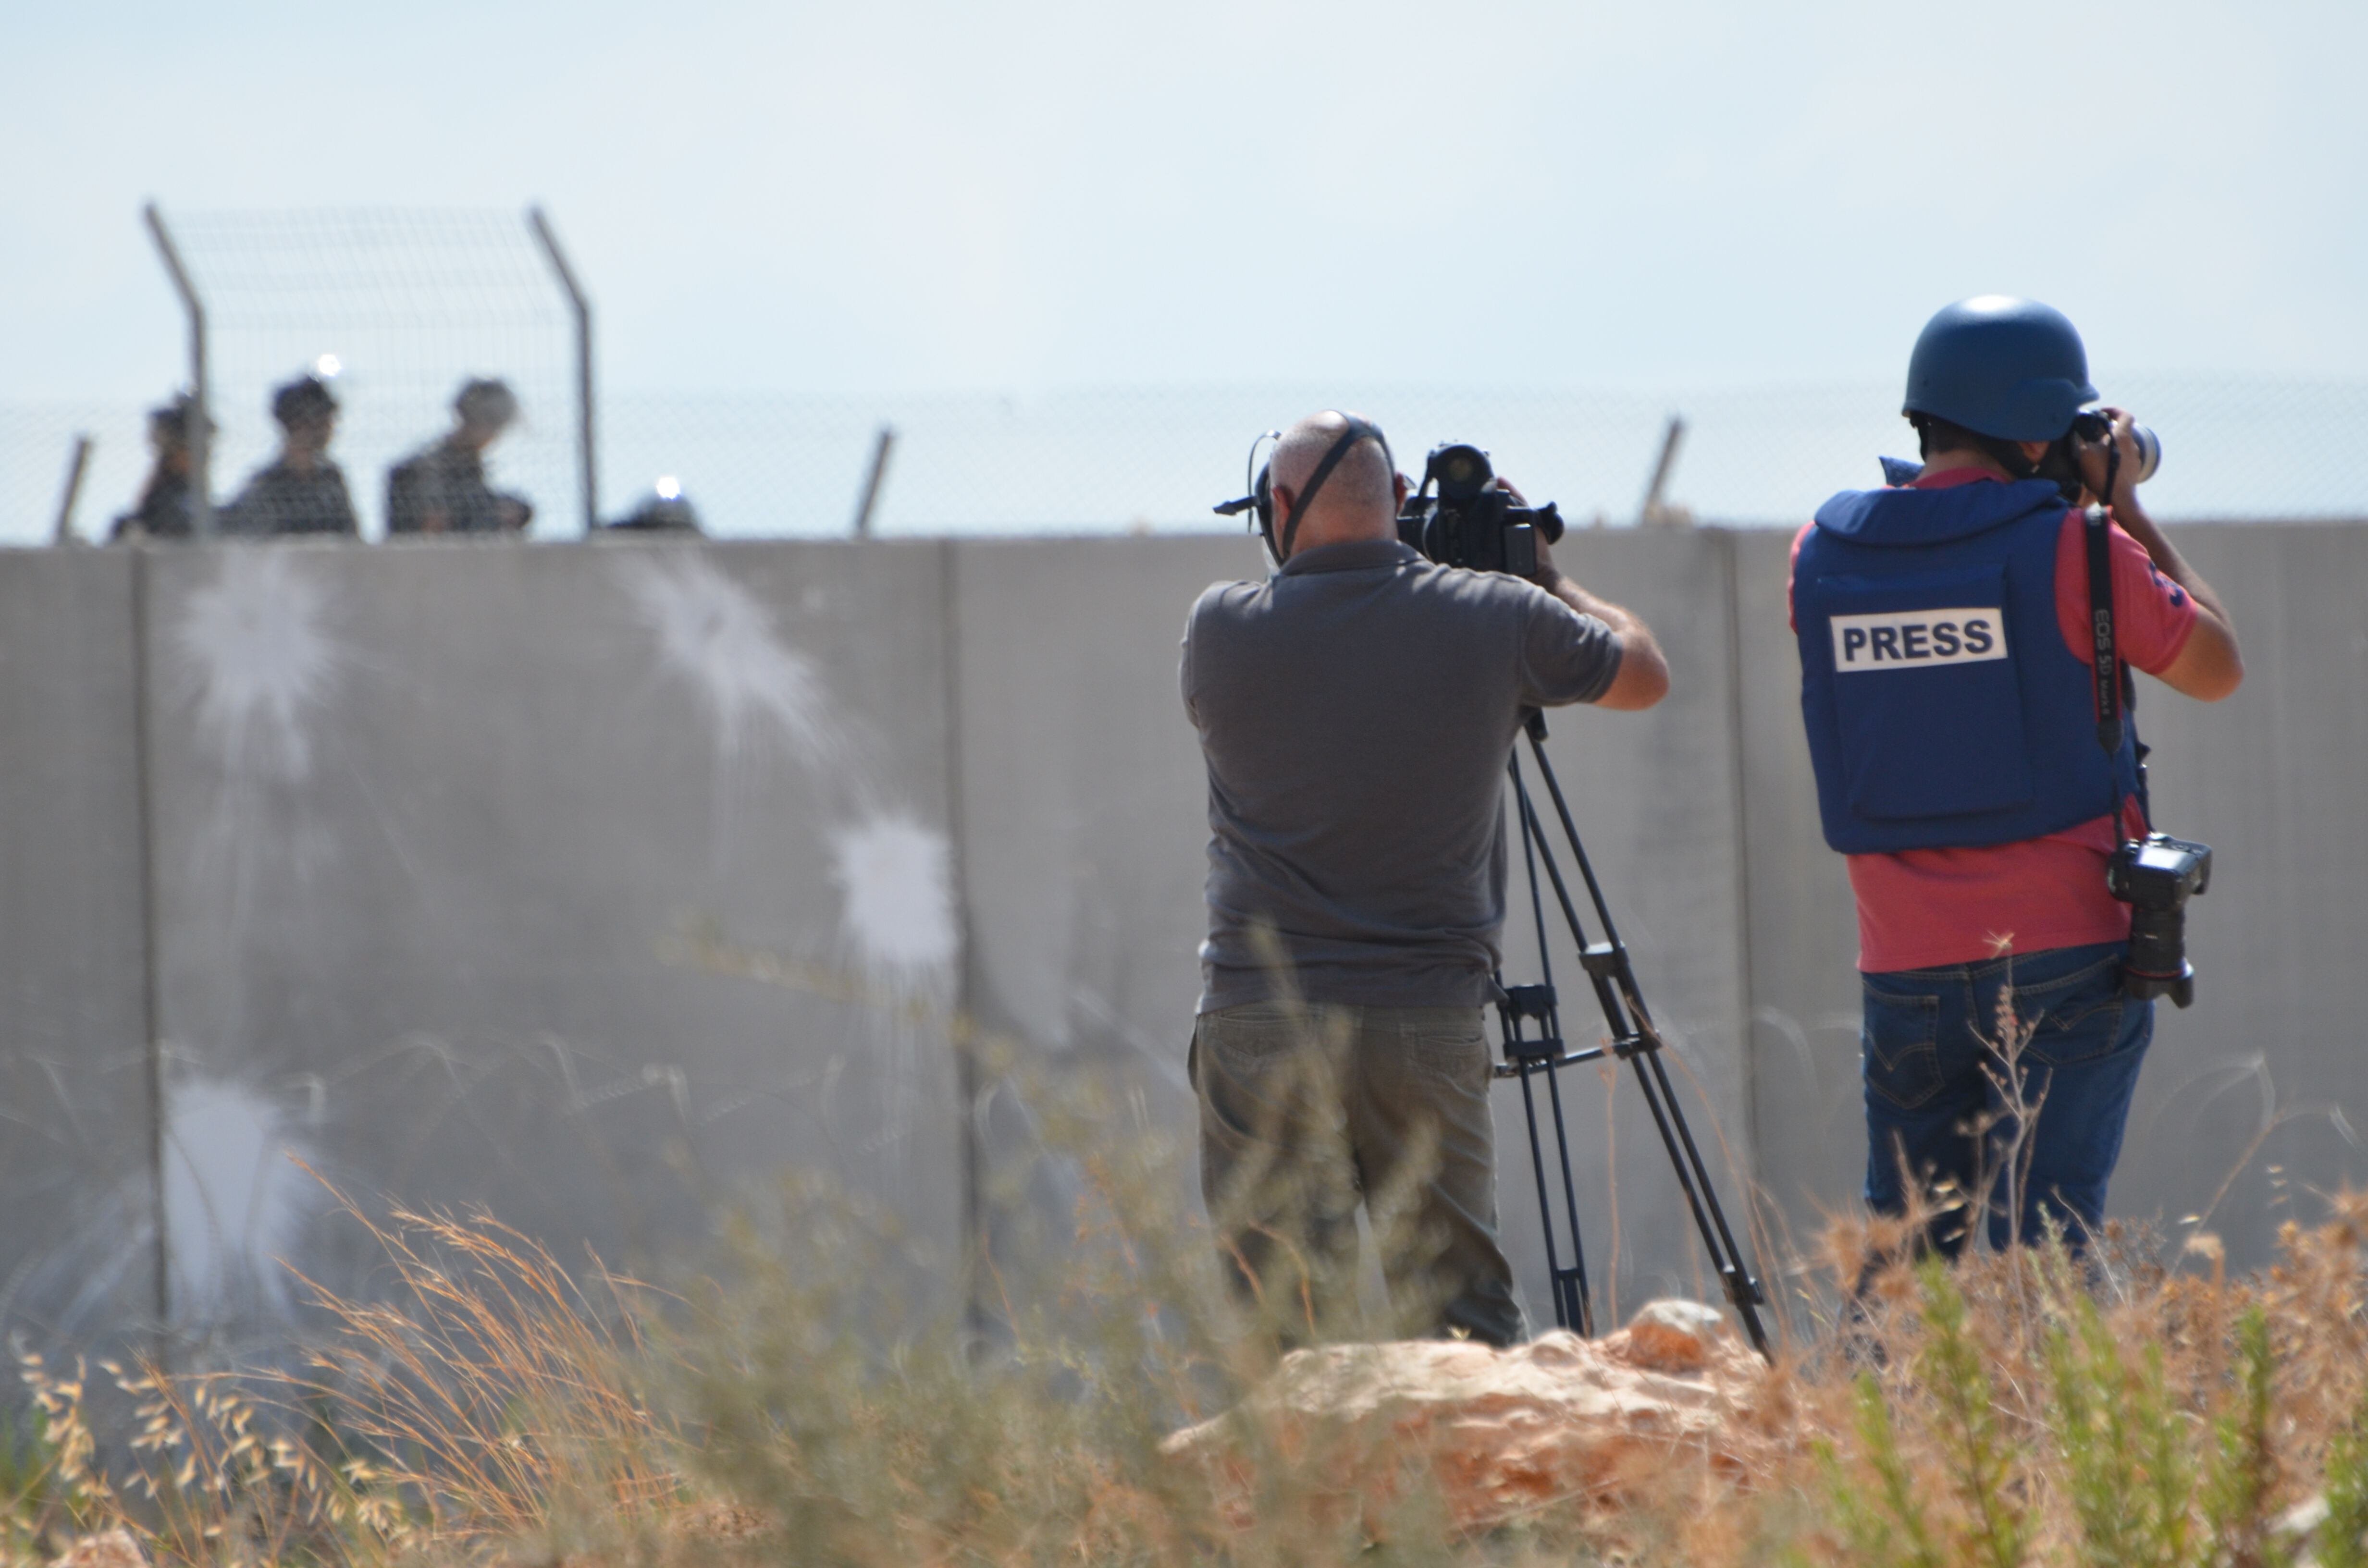 Journalists film the Israeli military during the Friday protests in Bilin, Palestine. 16/06/15